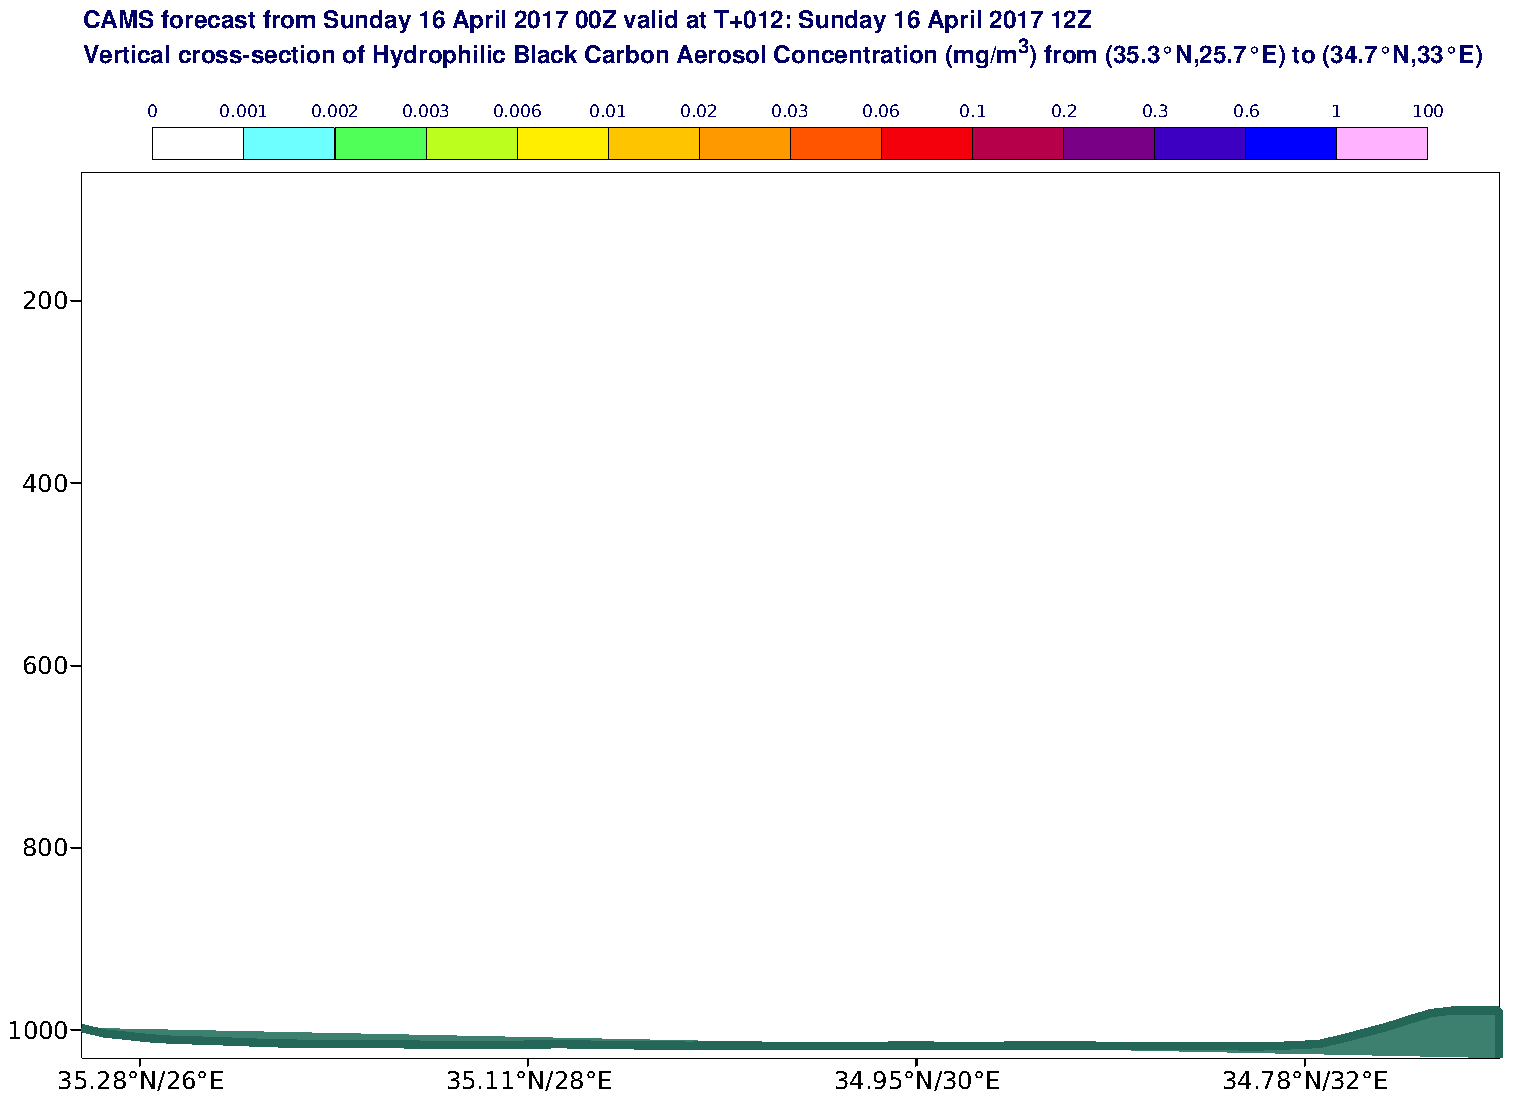 Vertical cross-section of Hydrophilic Black Carbon Aerosol Concentration (mg/m3) valid at T12 - 2017-04-16 12:00